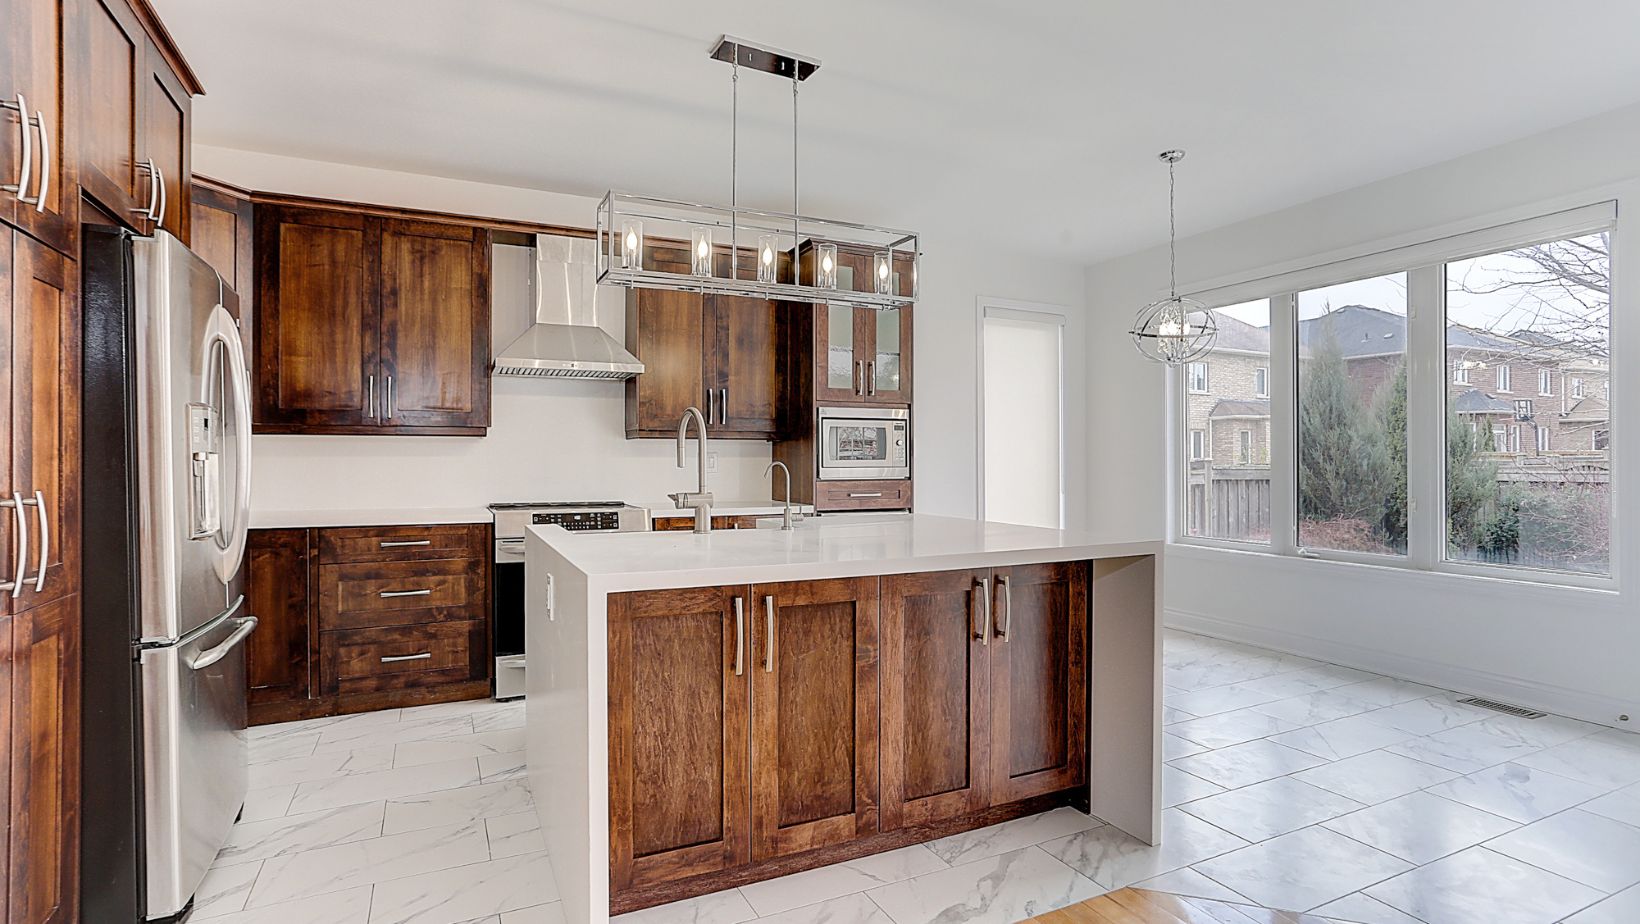 Kitchen of a house with wood cabinets and a kitchen island